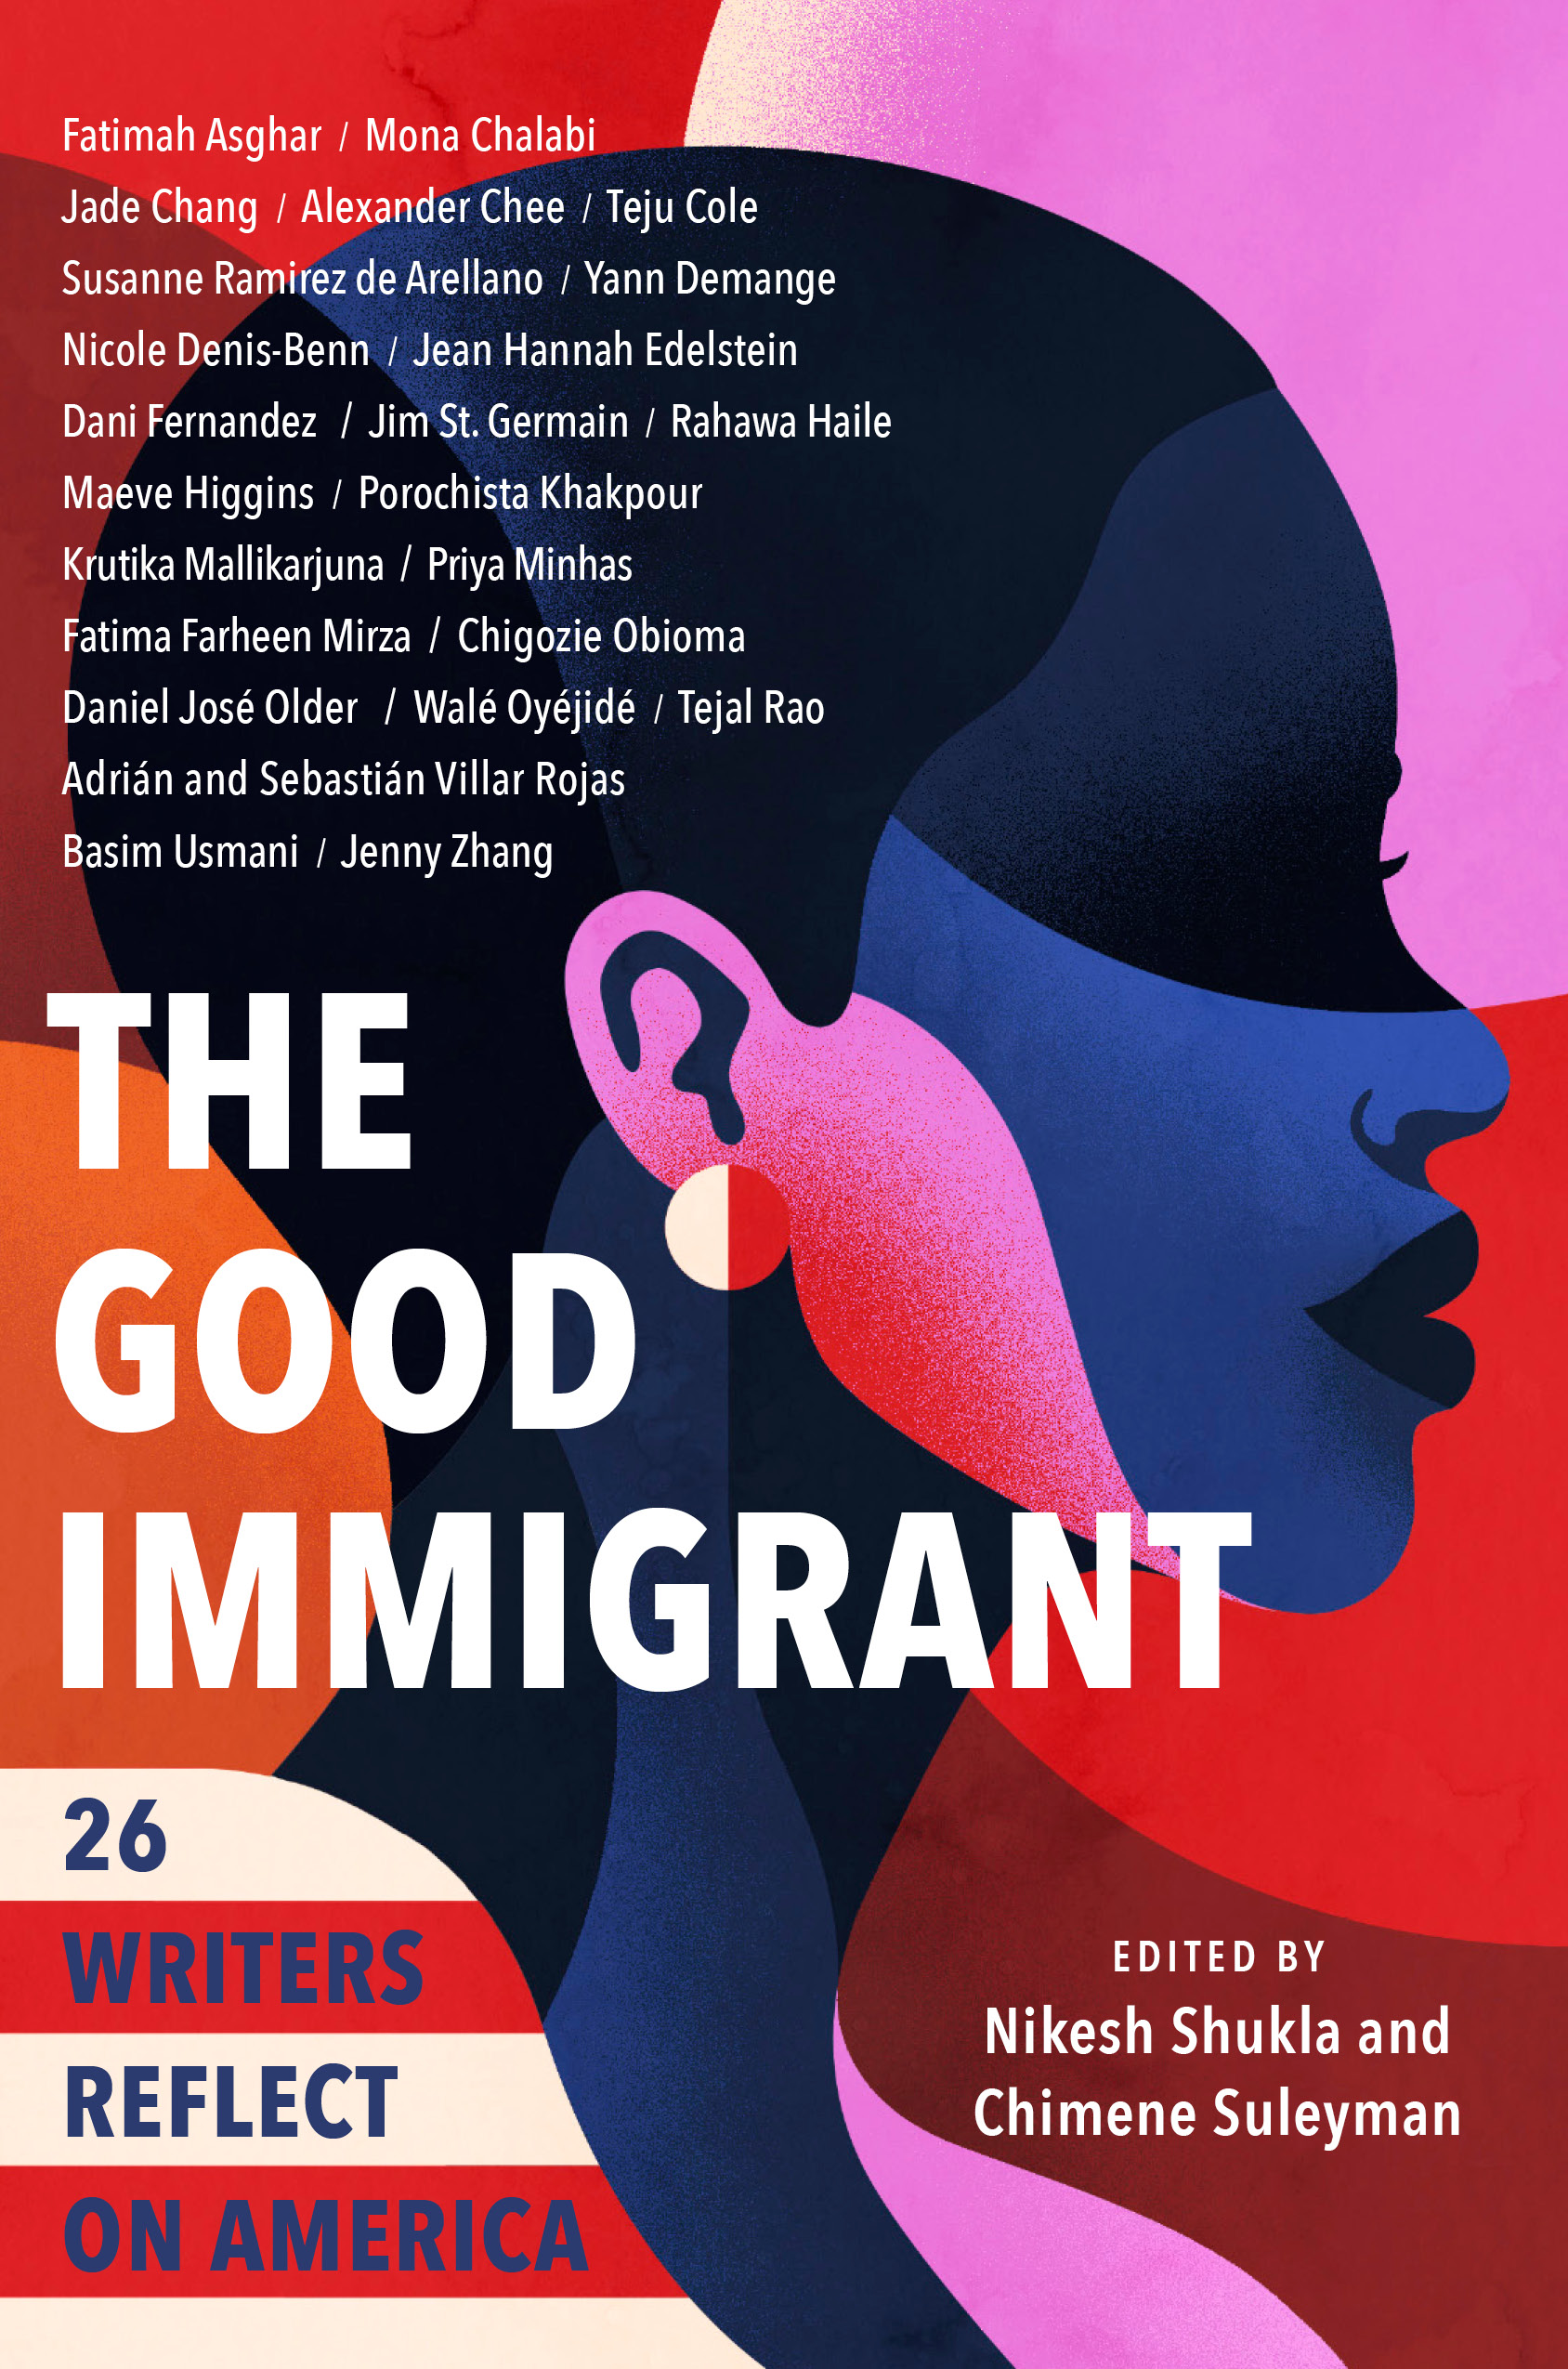 The Good Immigrant: 26 Writers Reflect on America is published Feb. 19 (Used with permission of Little, Brown and Company, New York.)